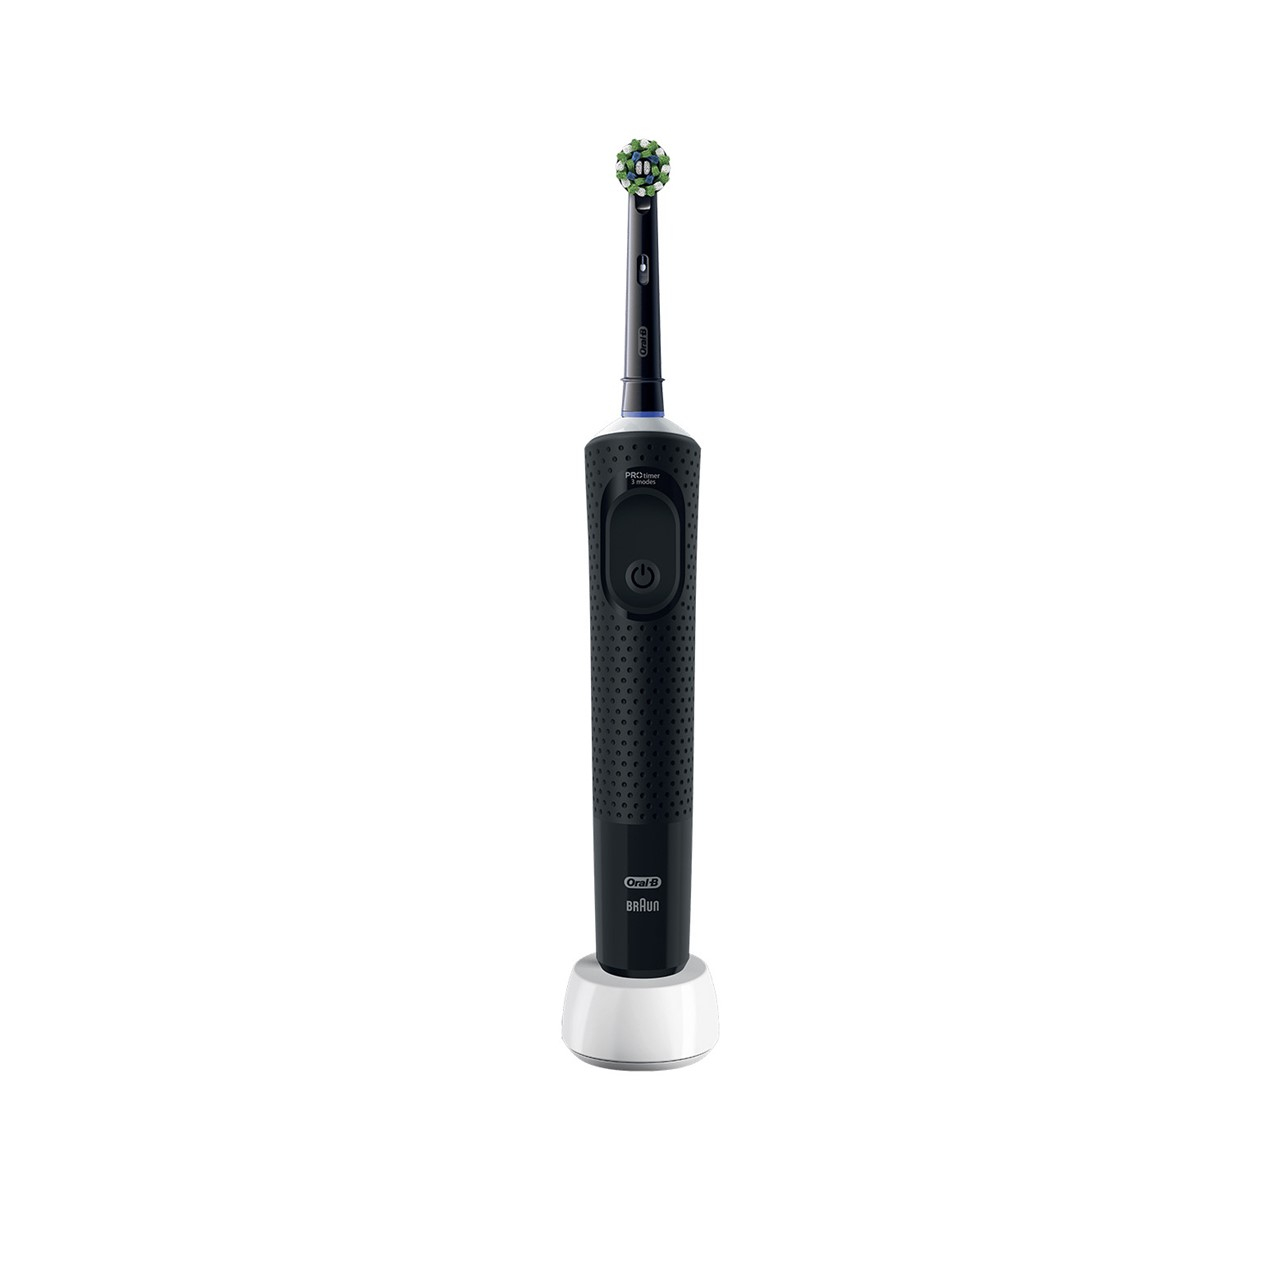 Oral-B Vitality 150 CrossAction Black Electric Rechargeable Toothbrush